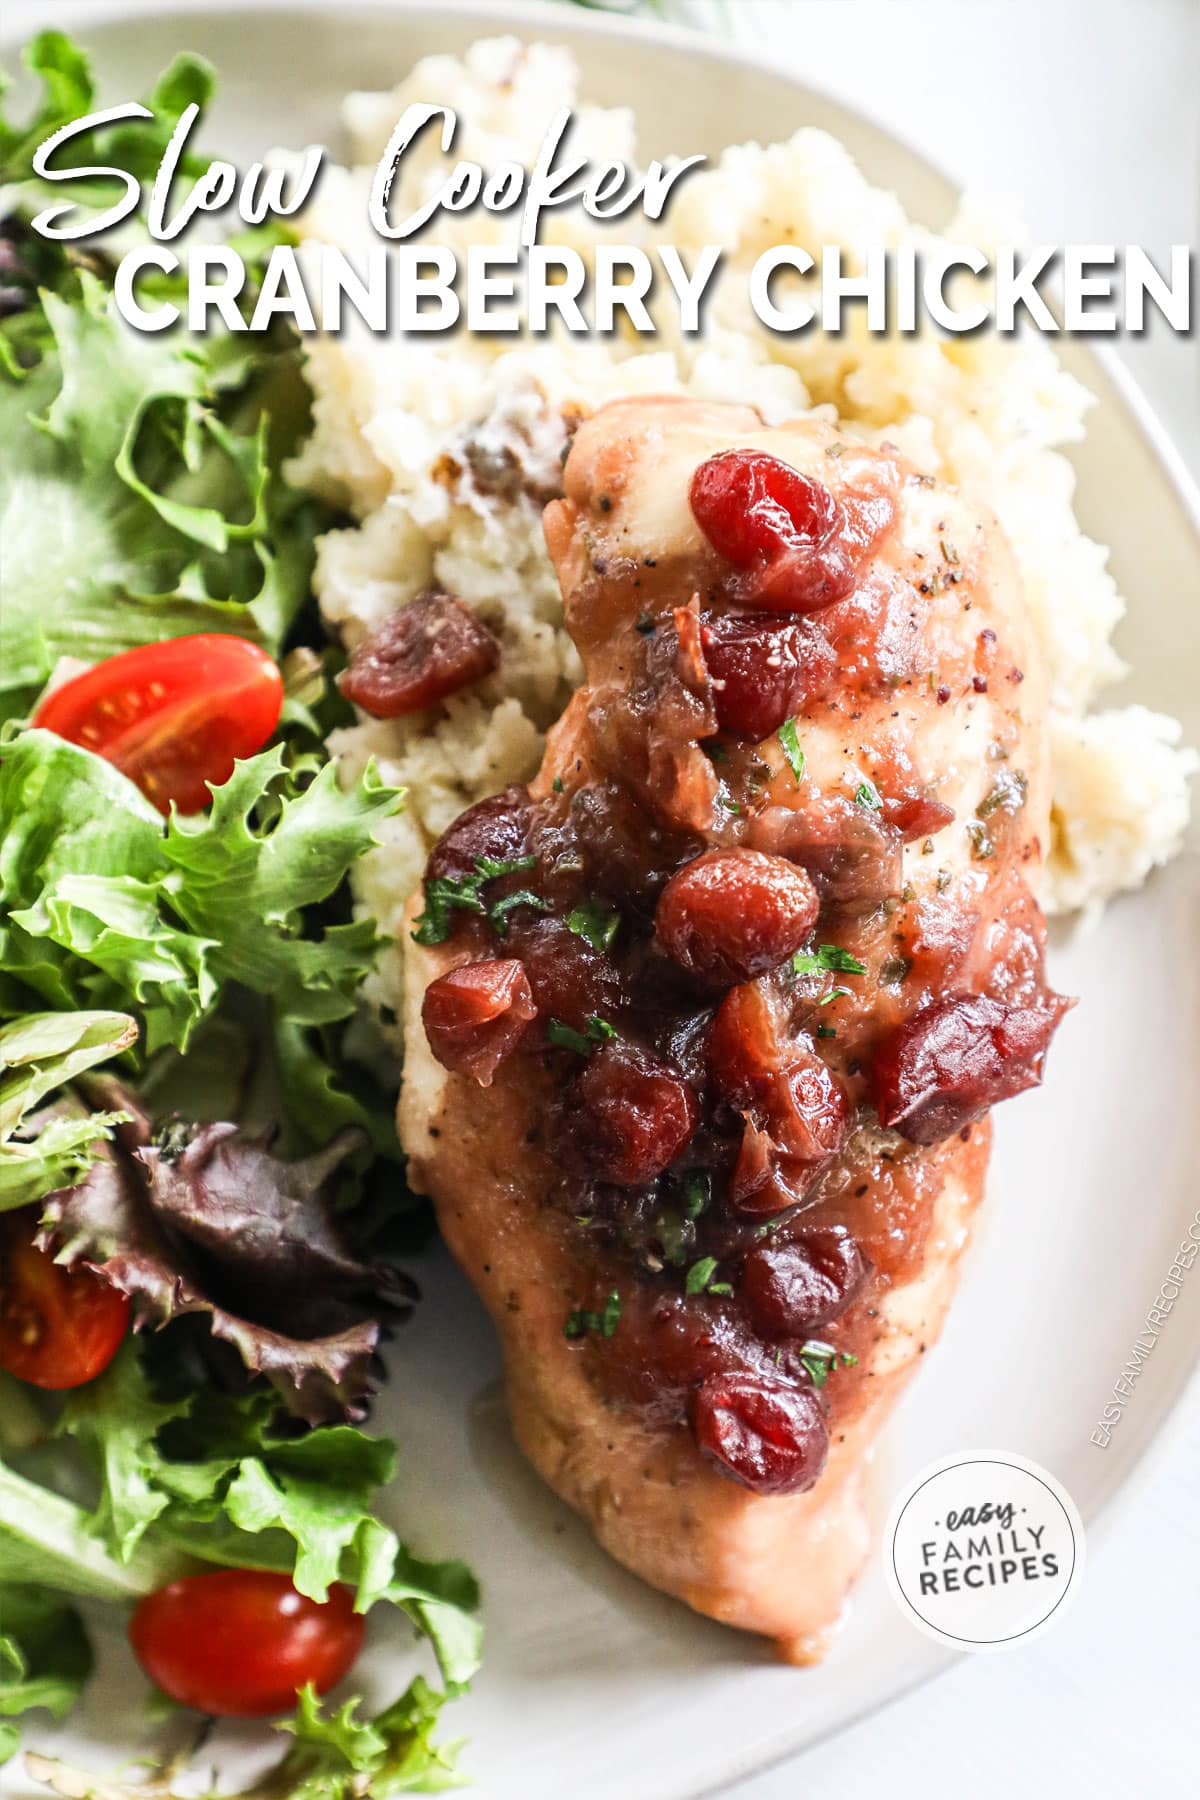 Slow cooker cranberry orange chicken on a plate with sides.